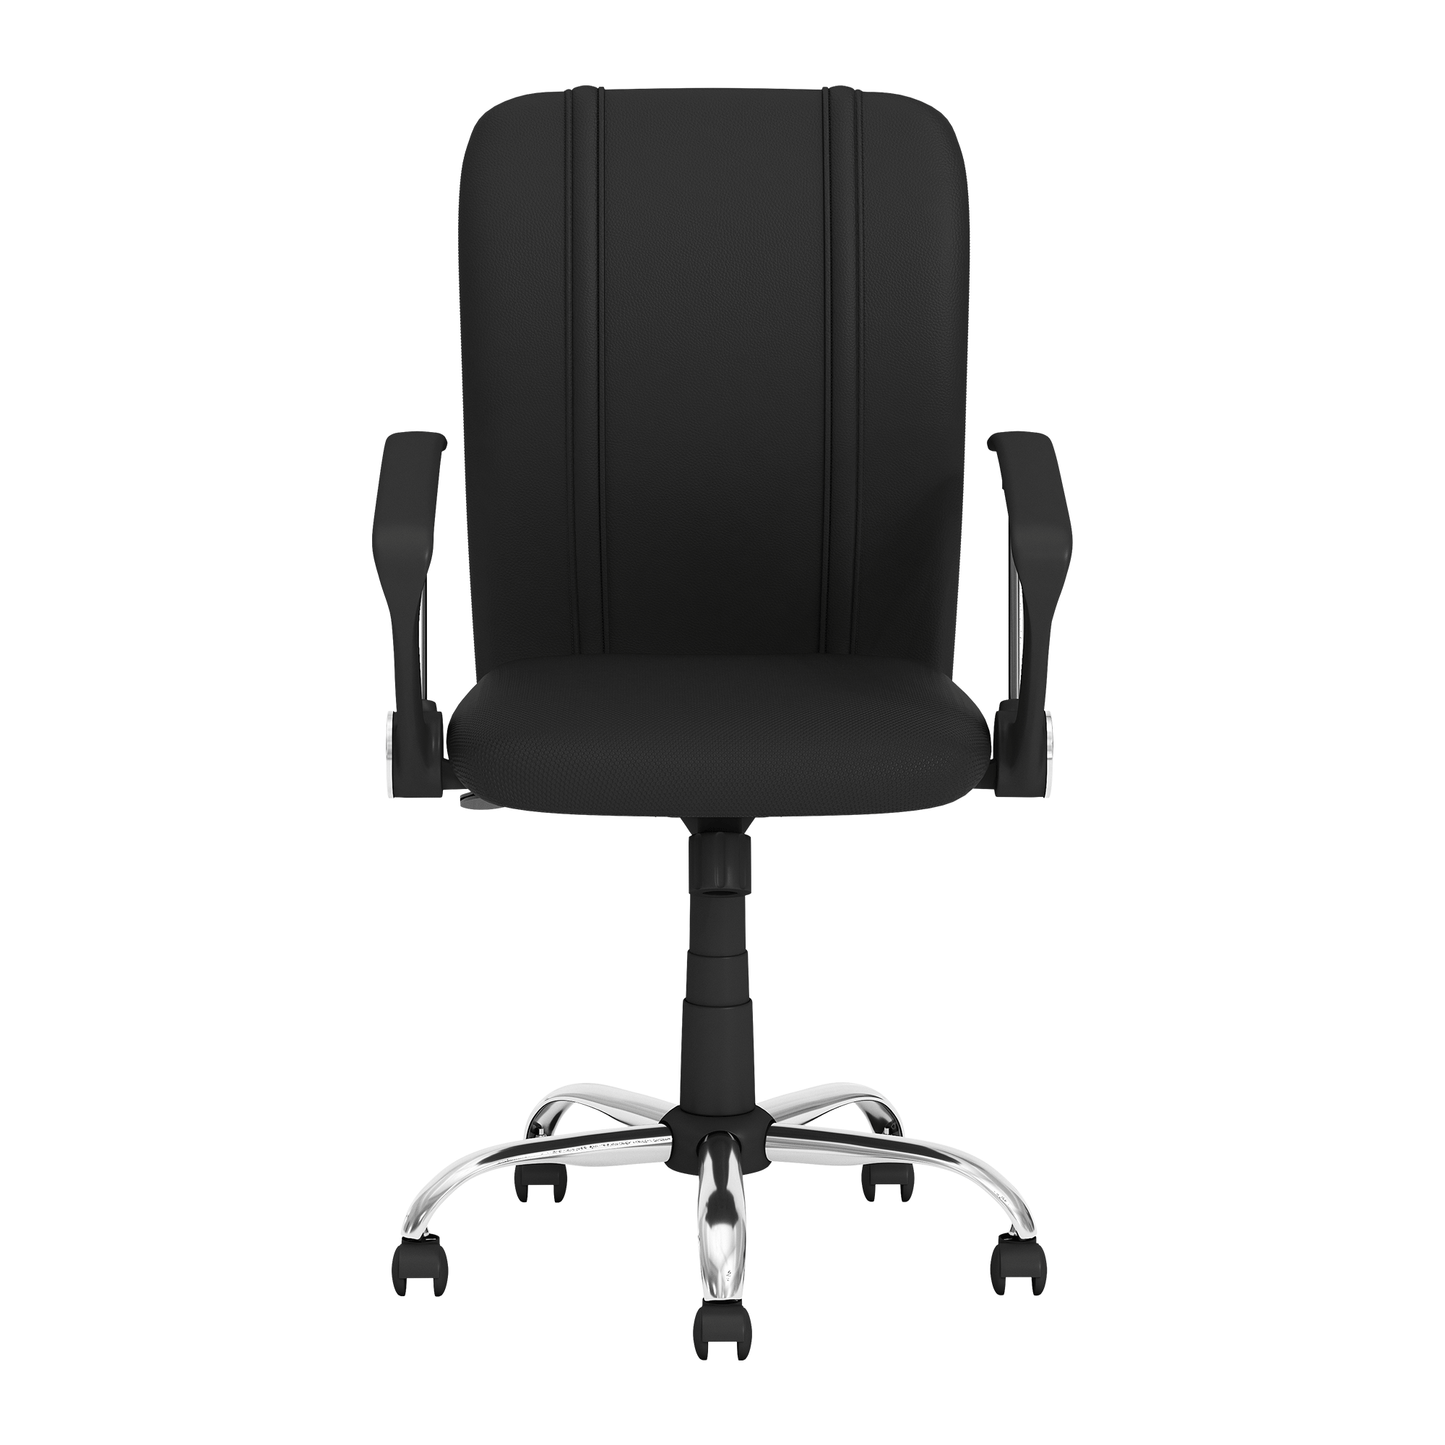 Curve Task Chair with Chicago Cubs Logo